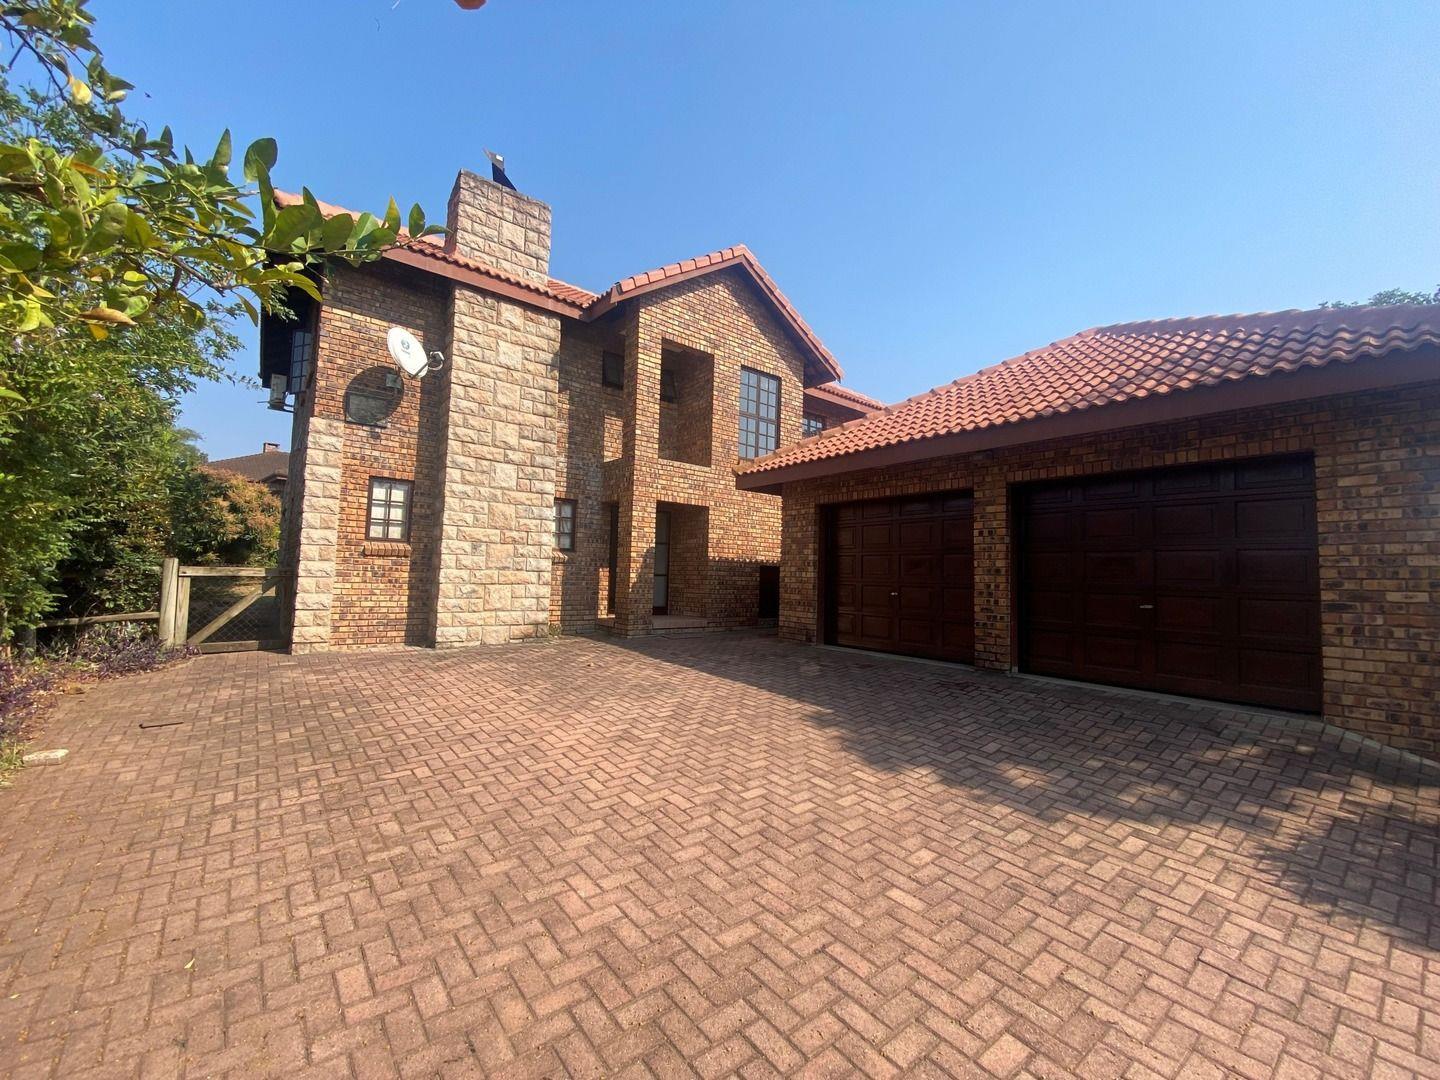 3 Bedroom House to rent in White River Country Estate - 2 Oakmount Close